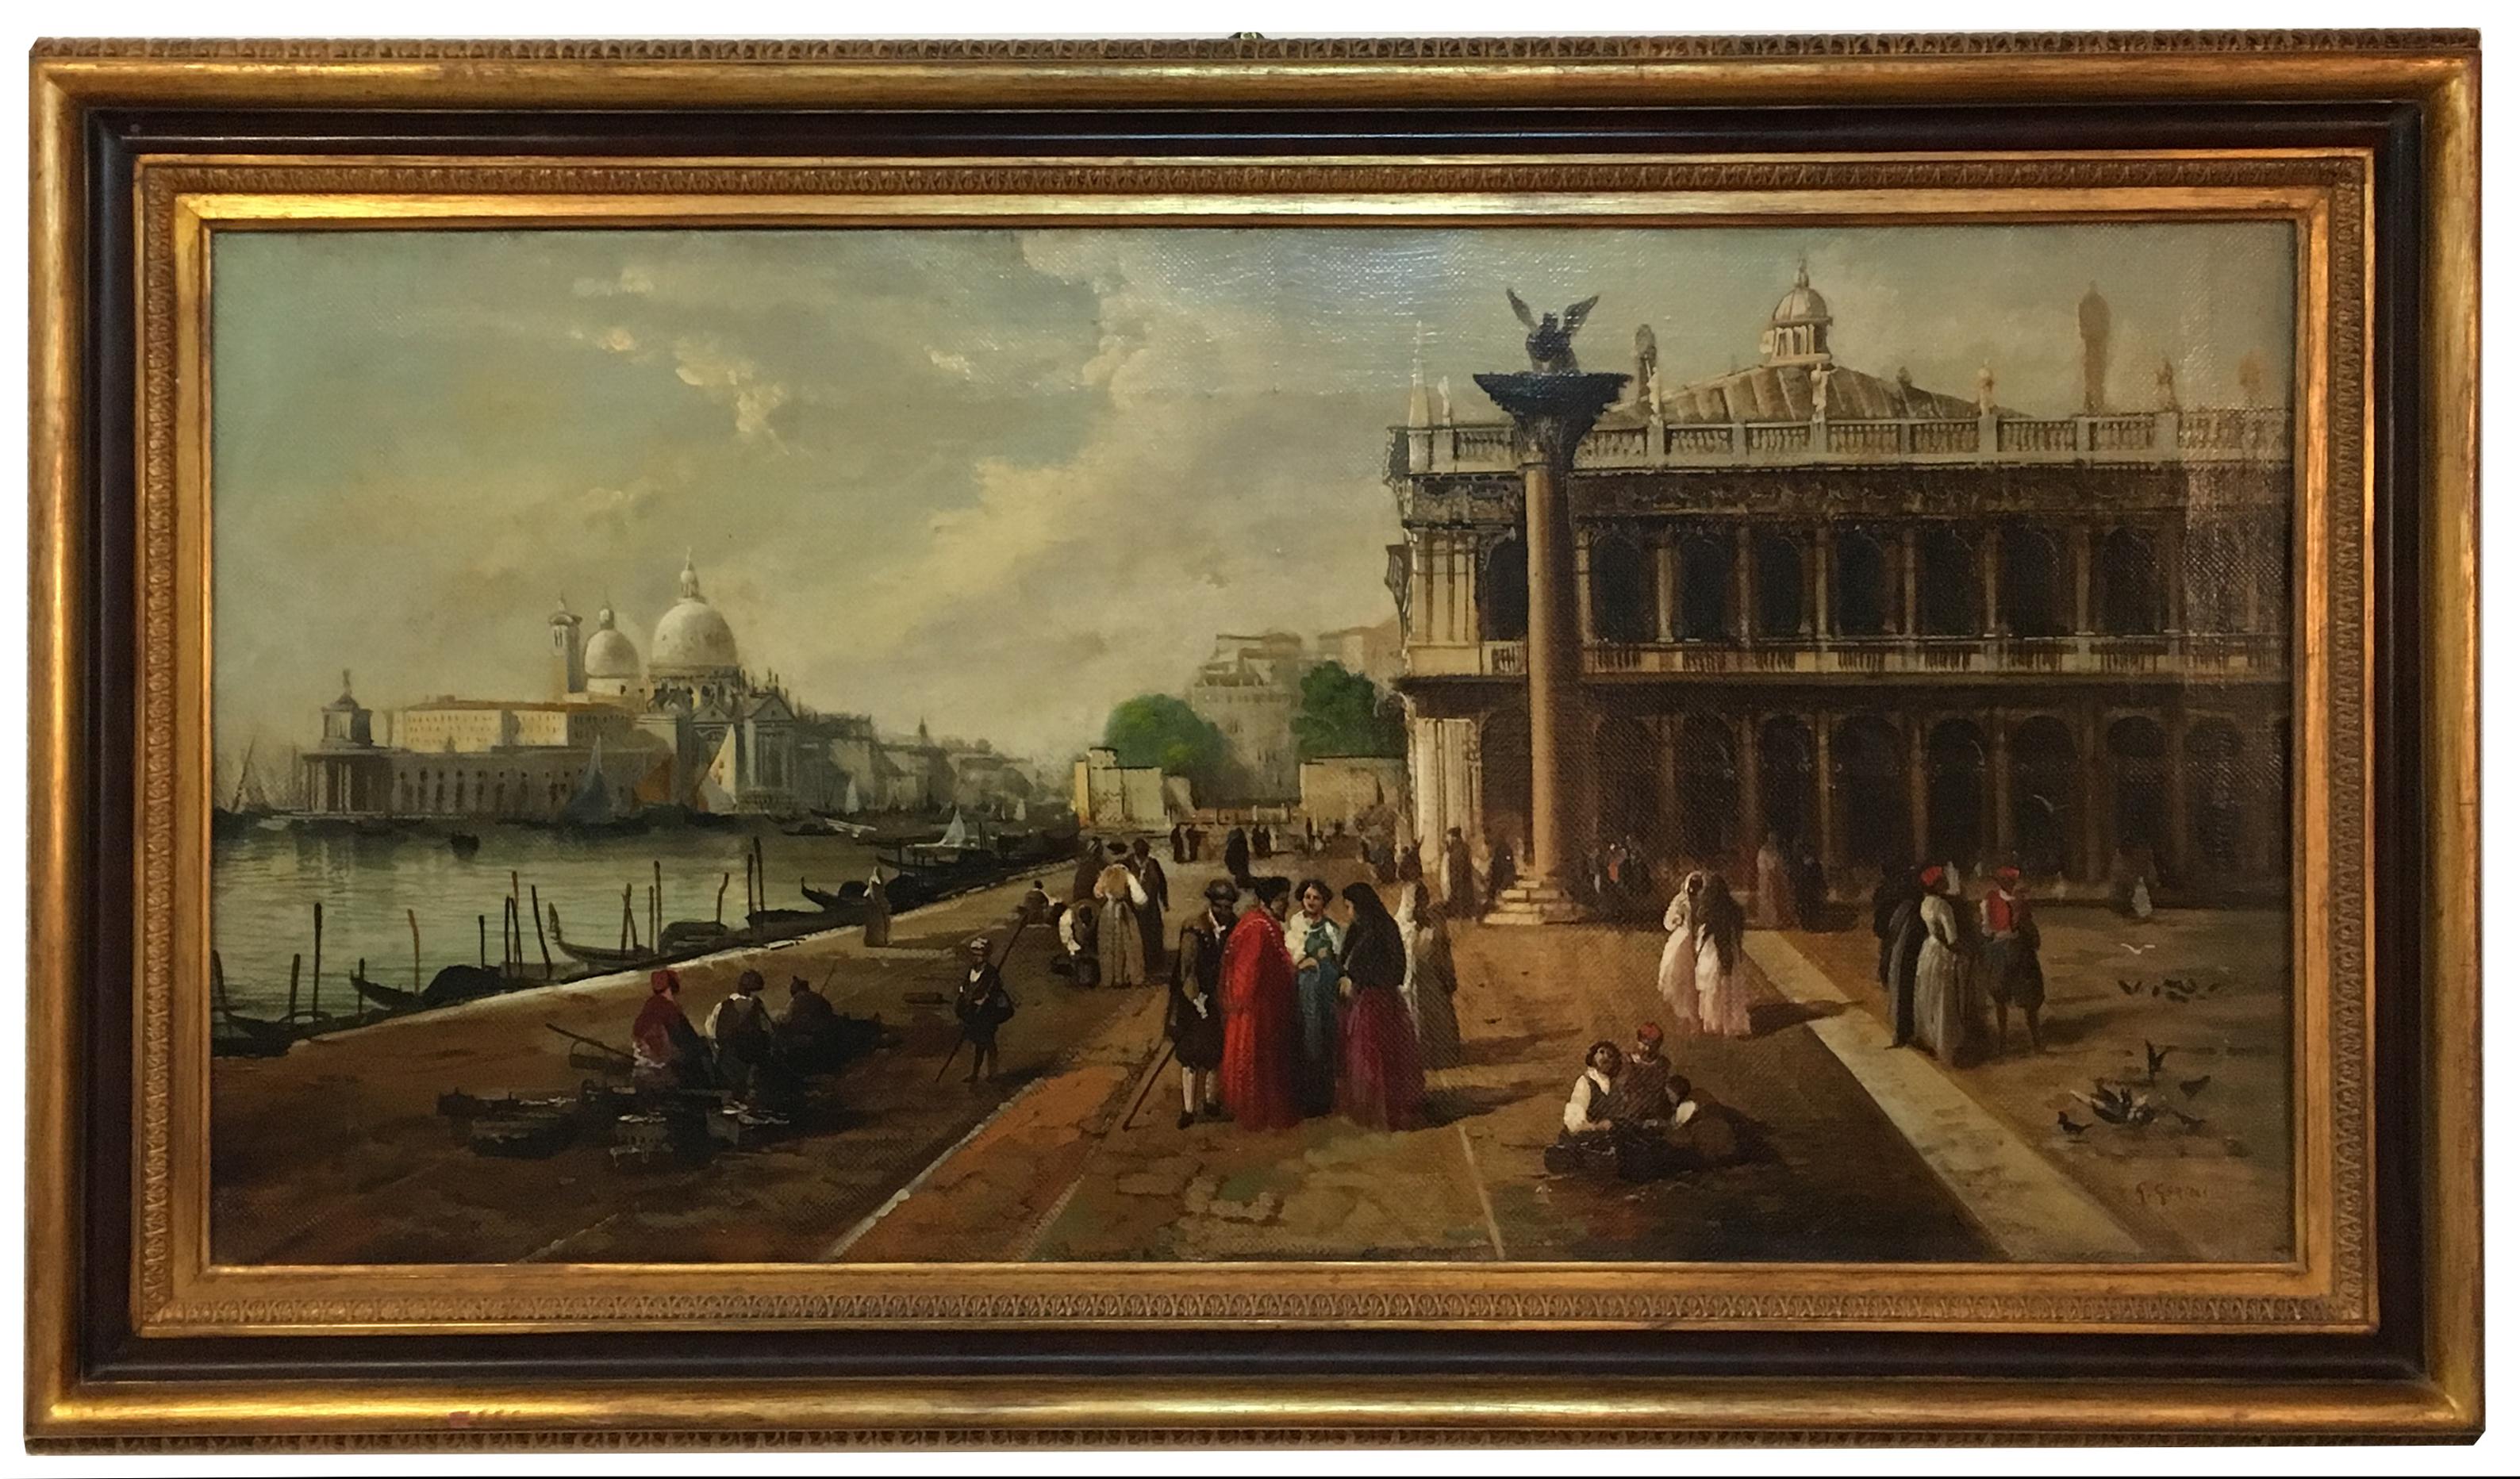 Venice - Giancarlo Gorini Italia 2002 - Oil on canvas cm.50x100 
Gold leaf gilded  wooden frameavailable on request

Giancarlo Gorini's canvas is an extraordinary work of Italian landscape painting. It is inspired by the painting 